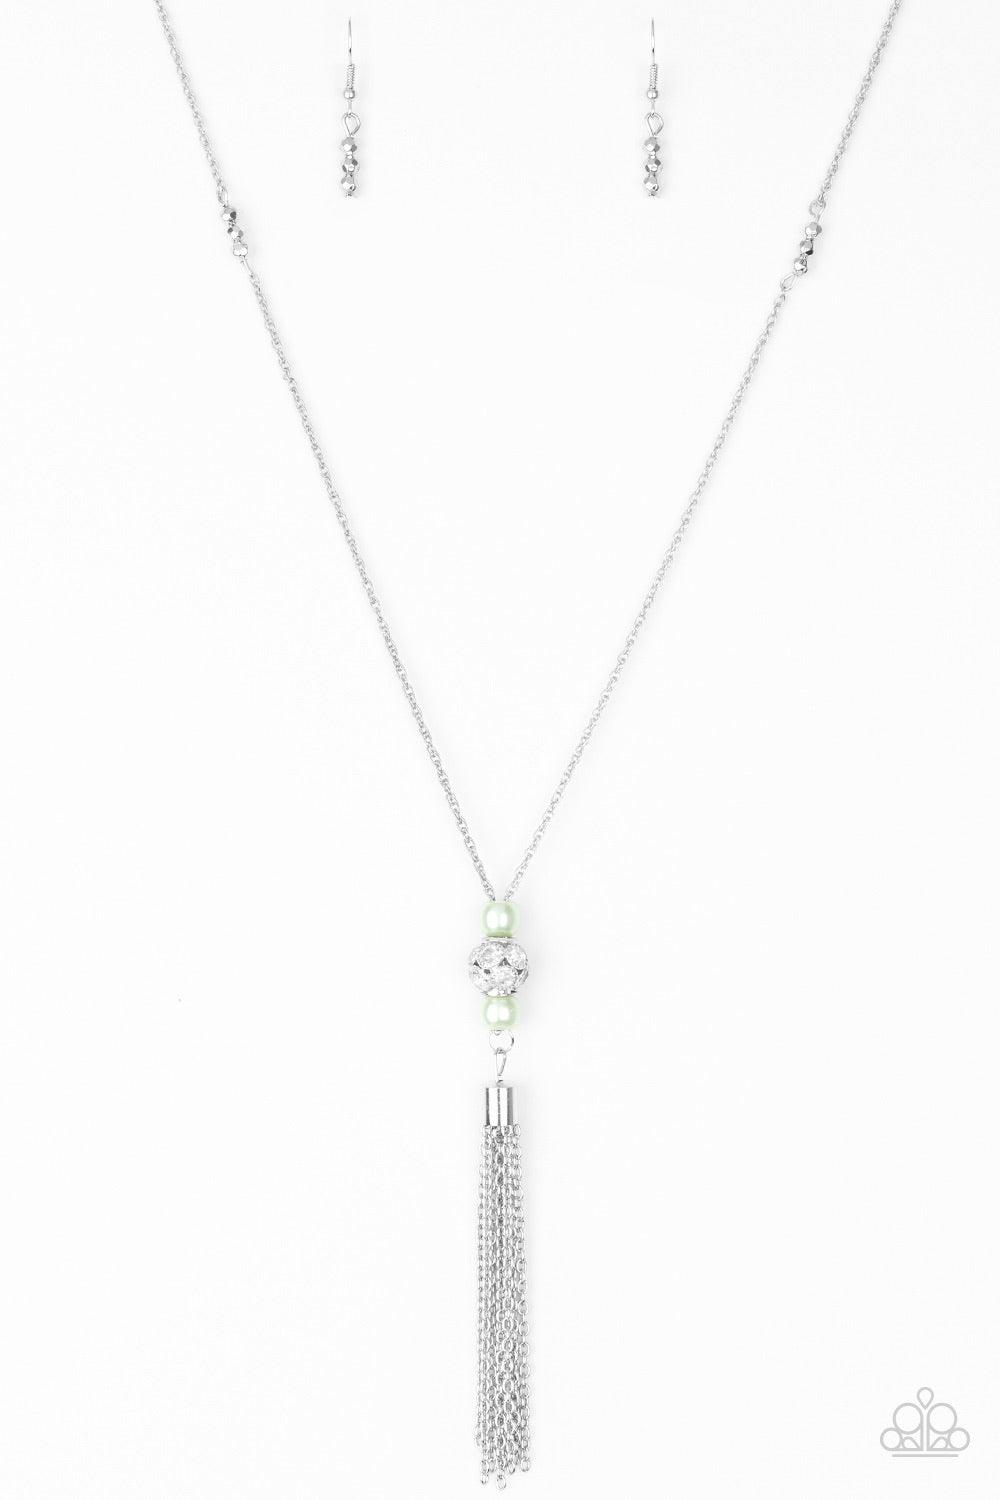 Paparazzi Accessories Century Shine - Green Infused with faceted silver accents, pearly green beads and a silver bead encrusted in glittery white rhinestones slide along a shimmery silver chain, creating an elegant centerpiece. A glistening silver tassel